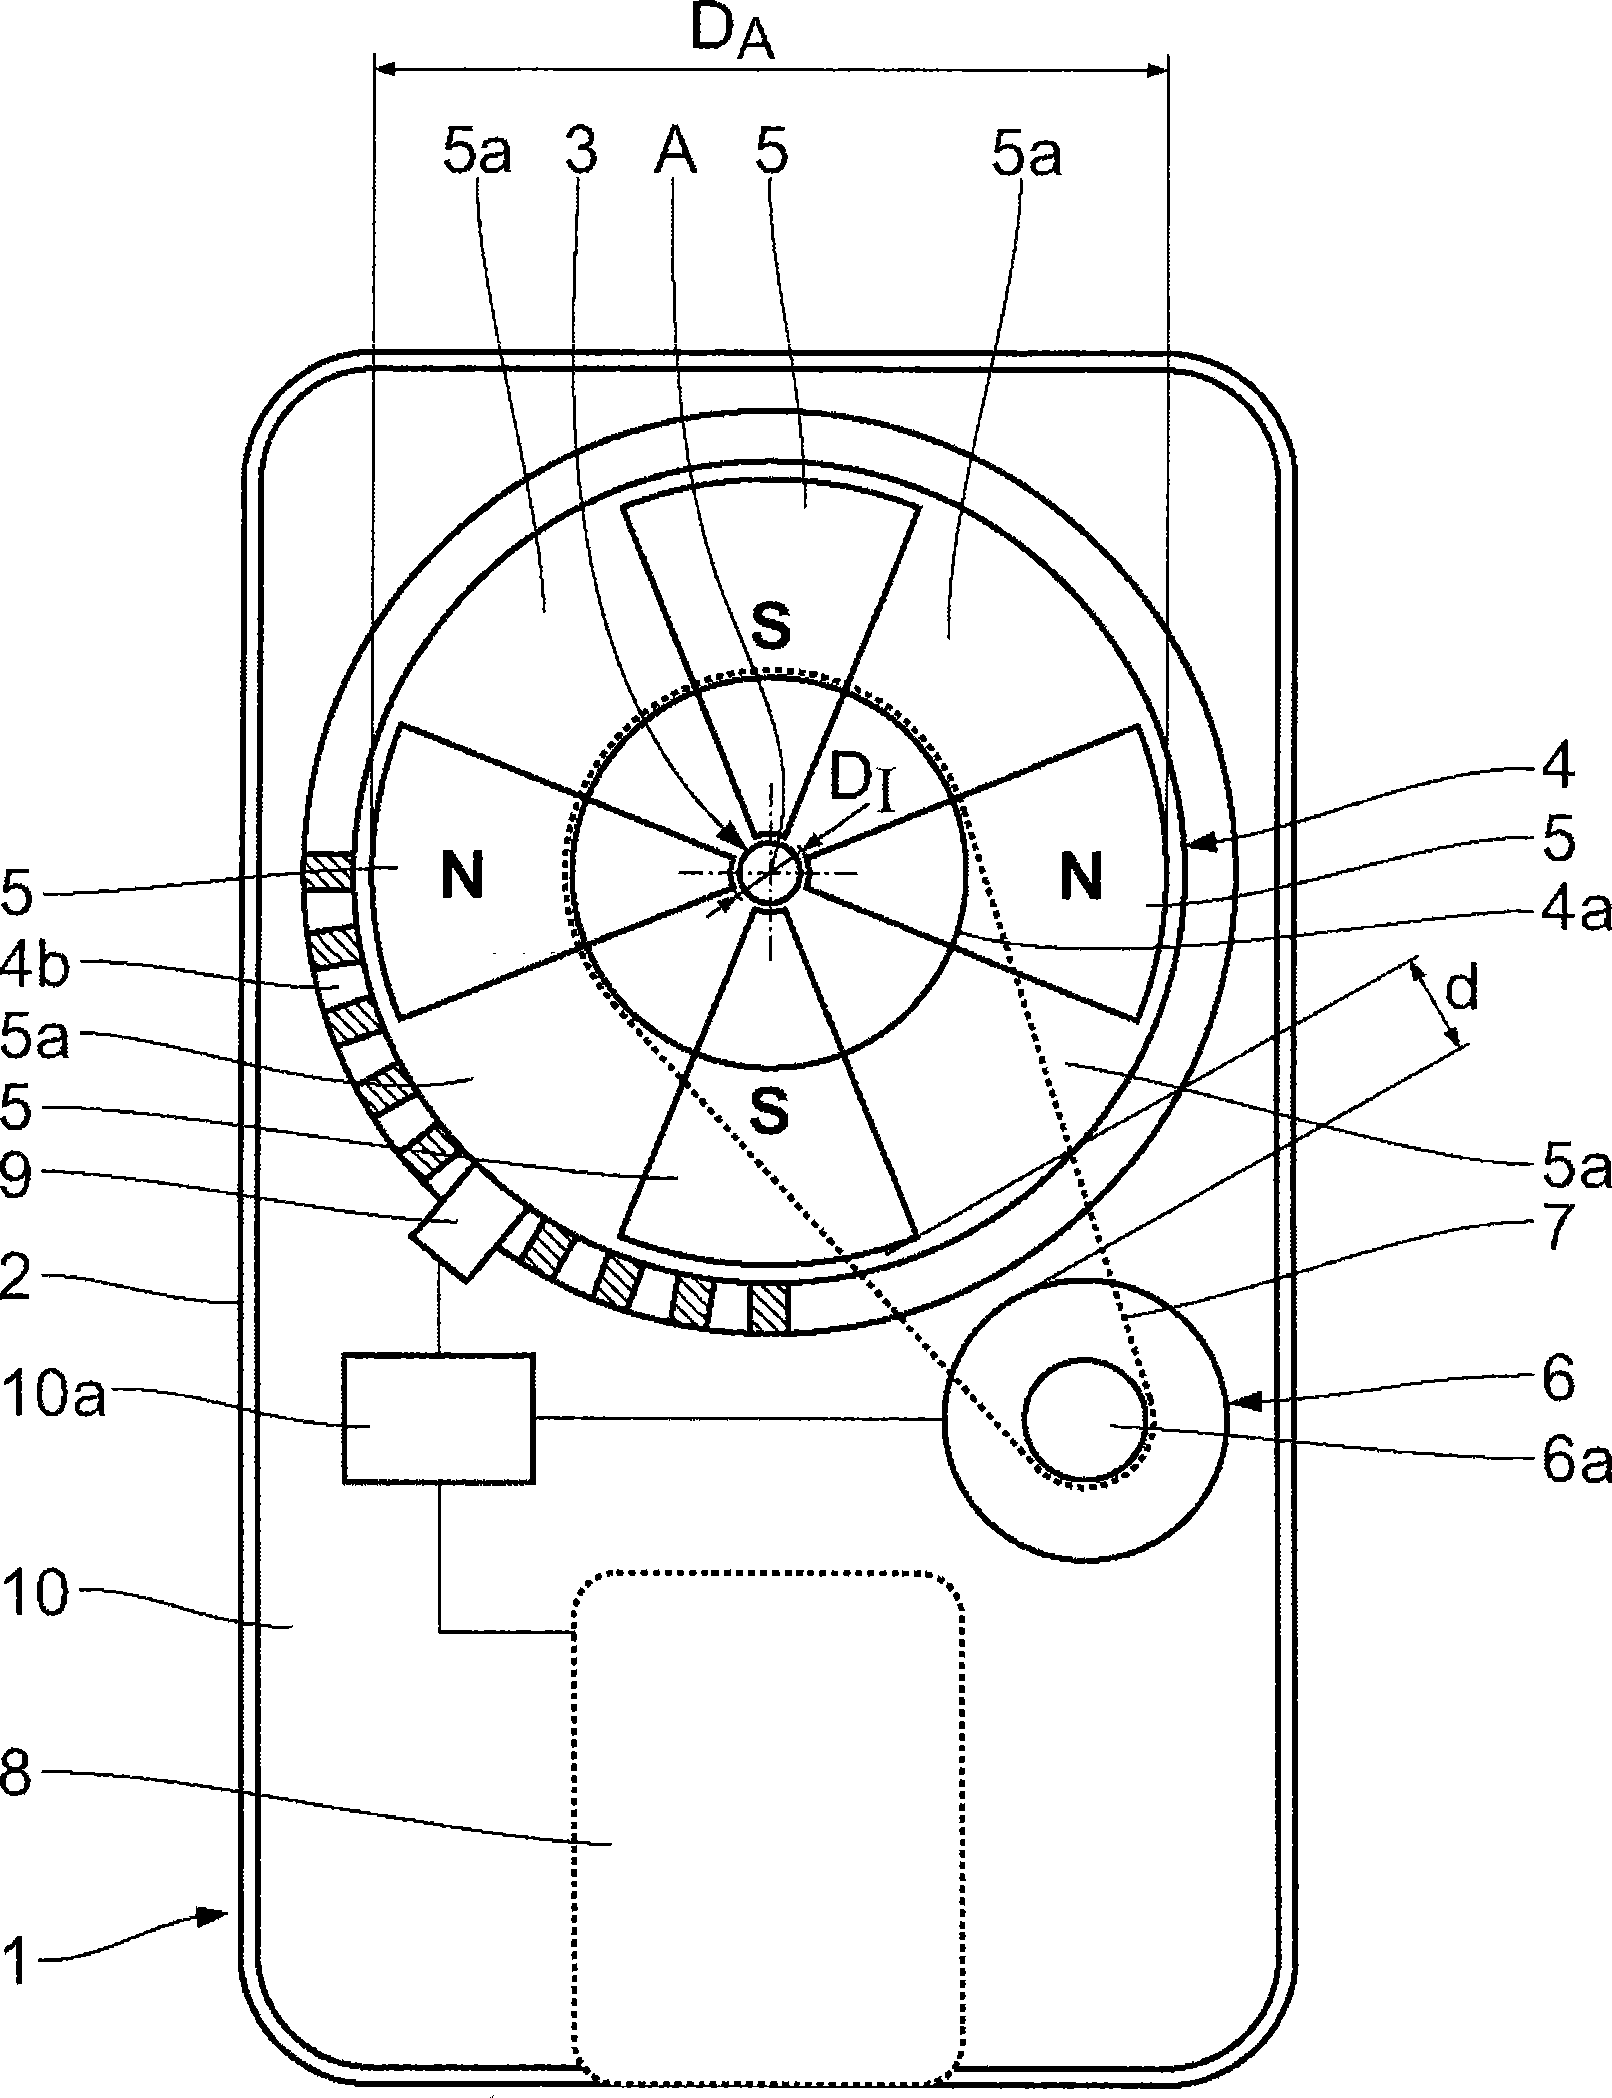 Portable device for generating a magnetic field for magneticfield therapy